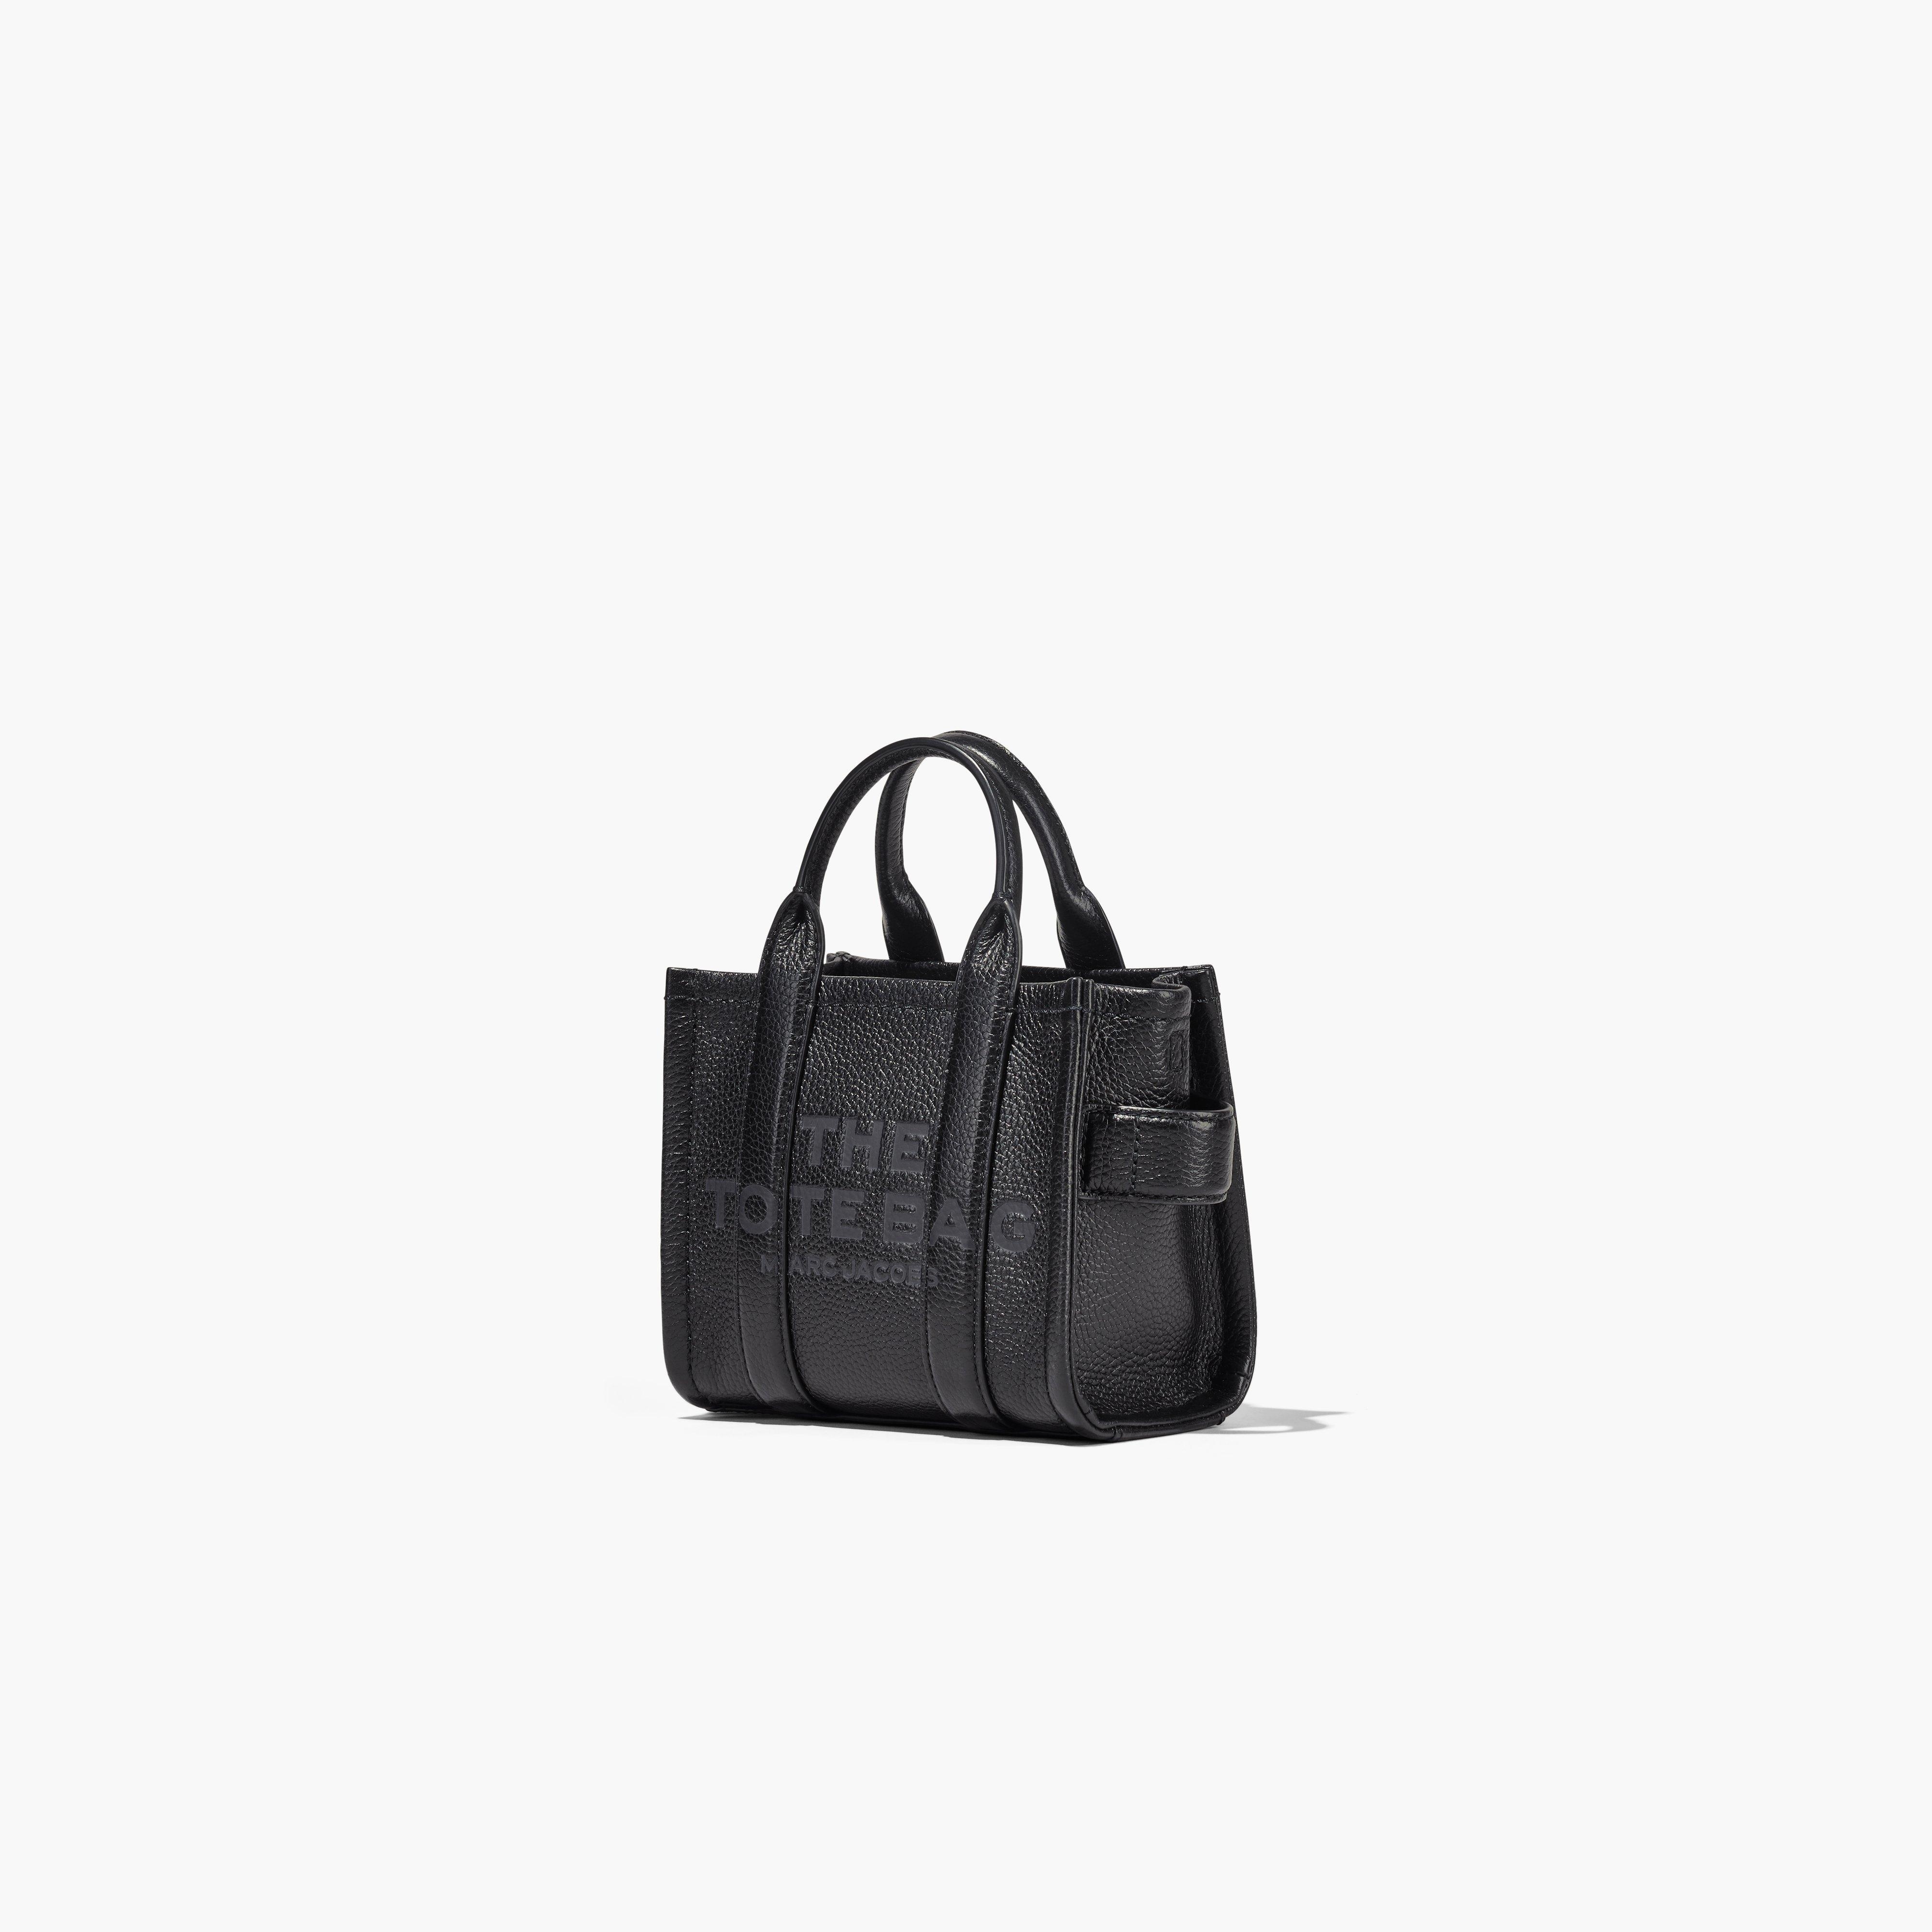 THE LEATHER MICRO TOTE BAG - 5